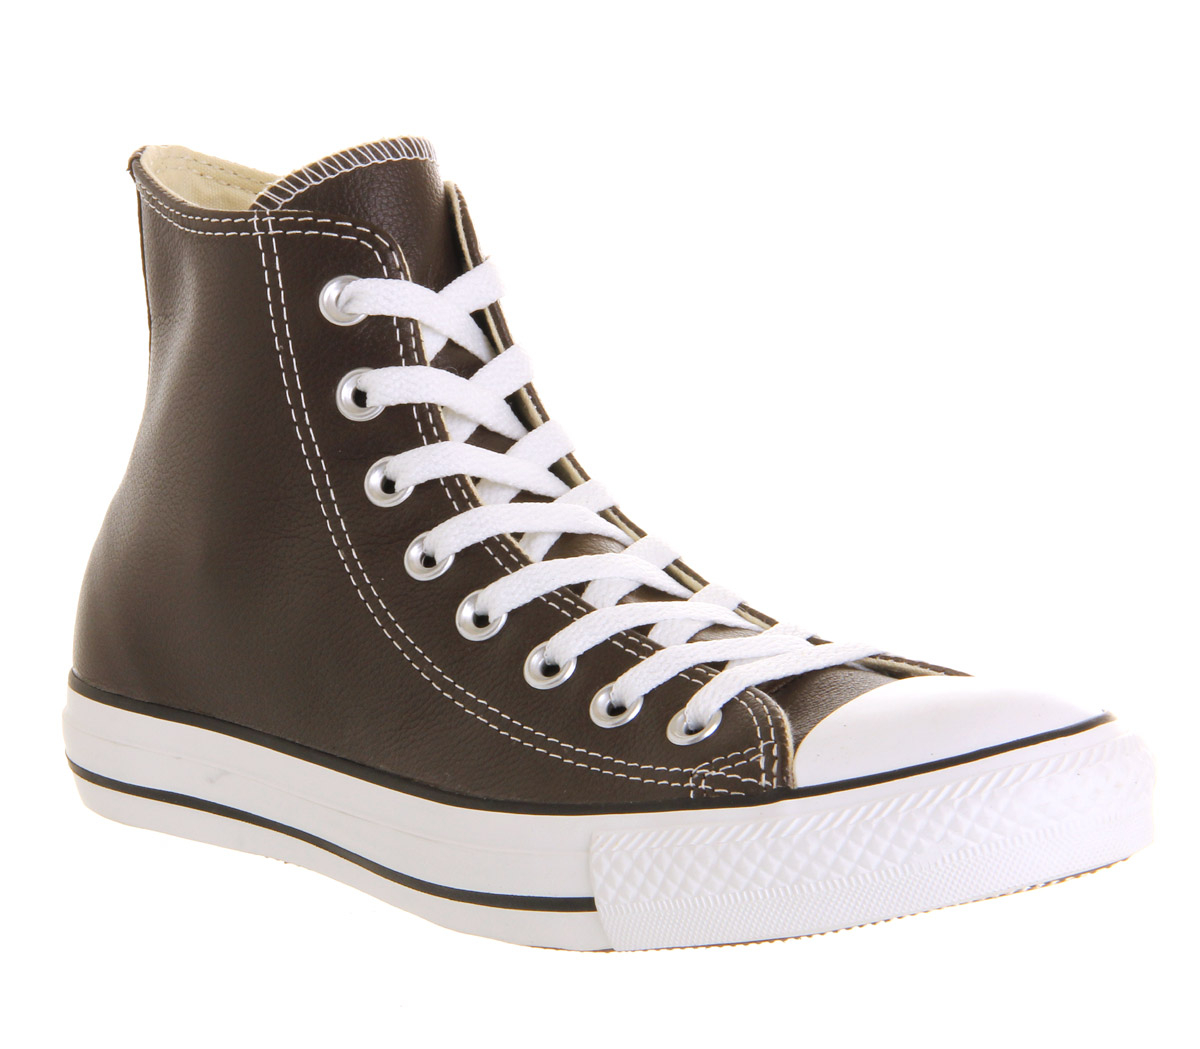 Converse All Star Hi Leather in Chocolate (Brown) for Men - Lyst